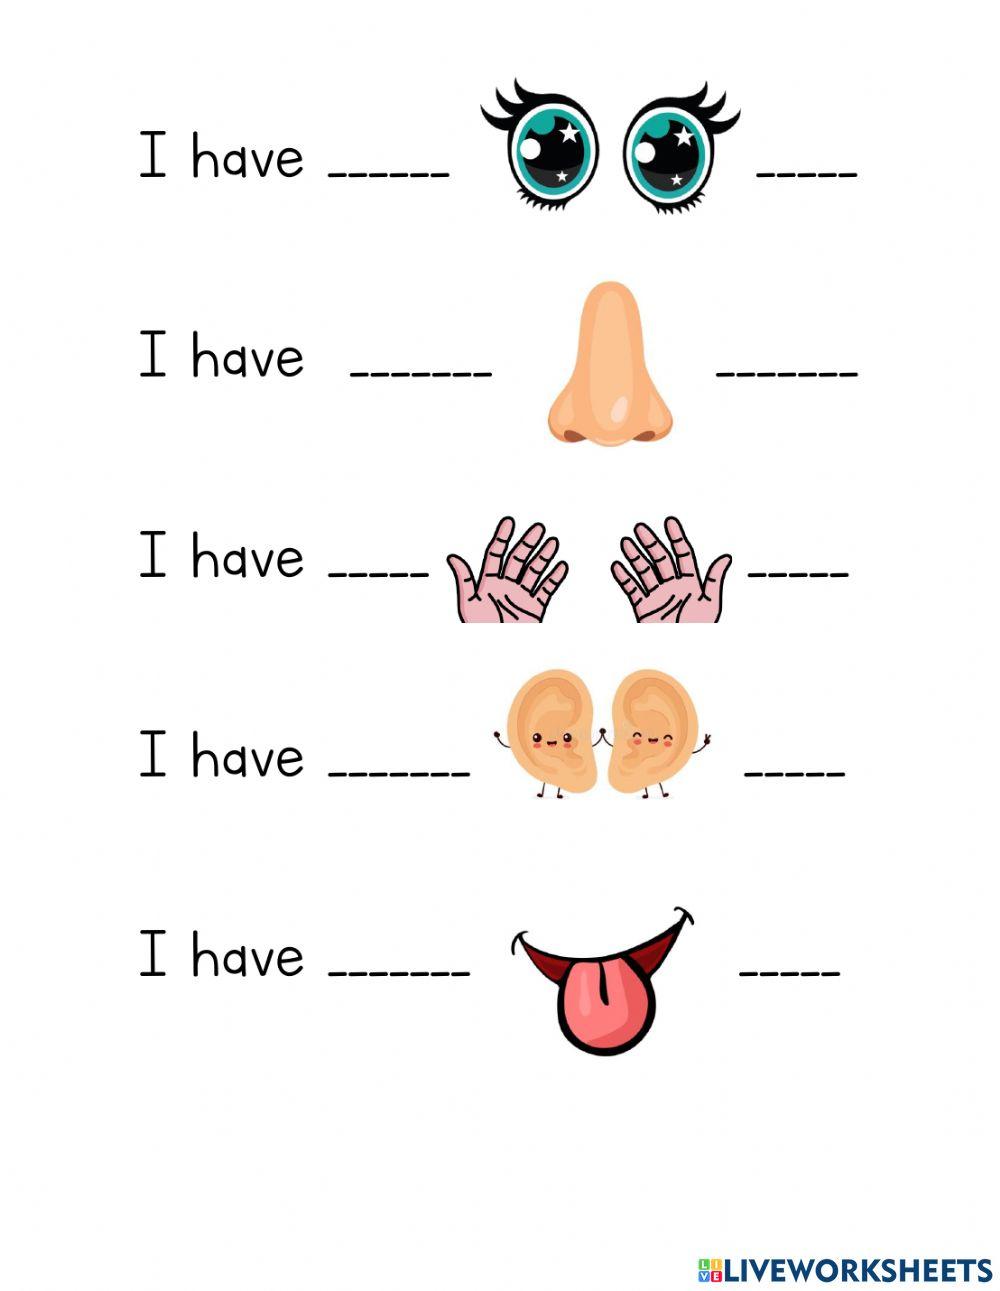 Body parts related to senses